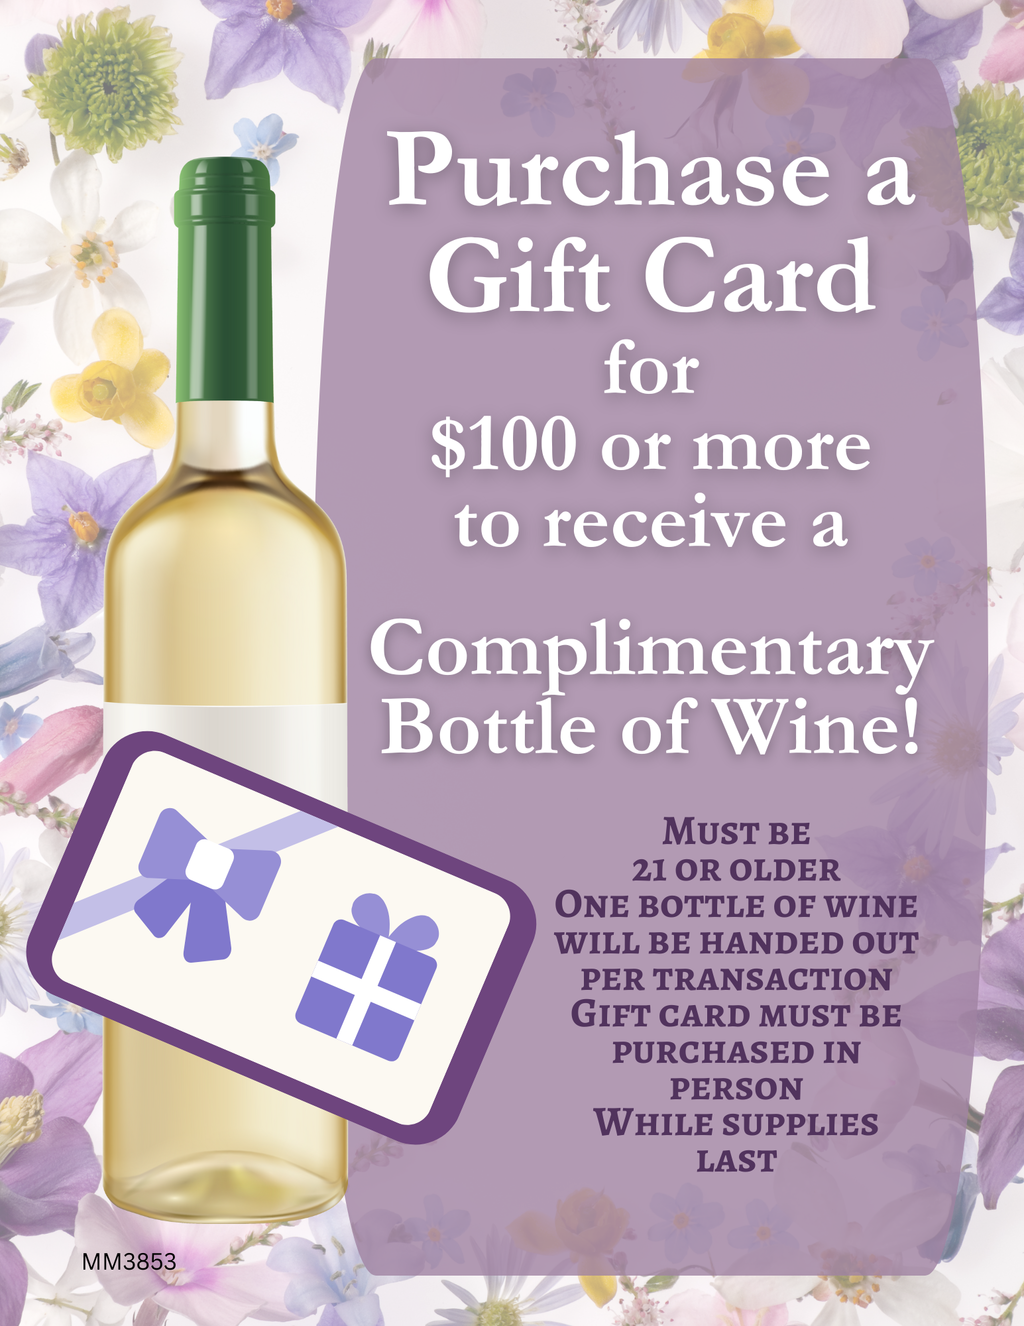 Space Coast Massage and Spa Mother's Day Wine and Gift Card Promotion